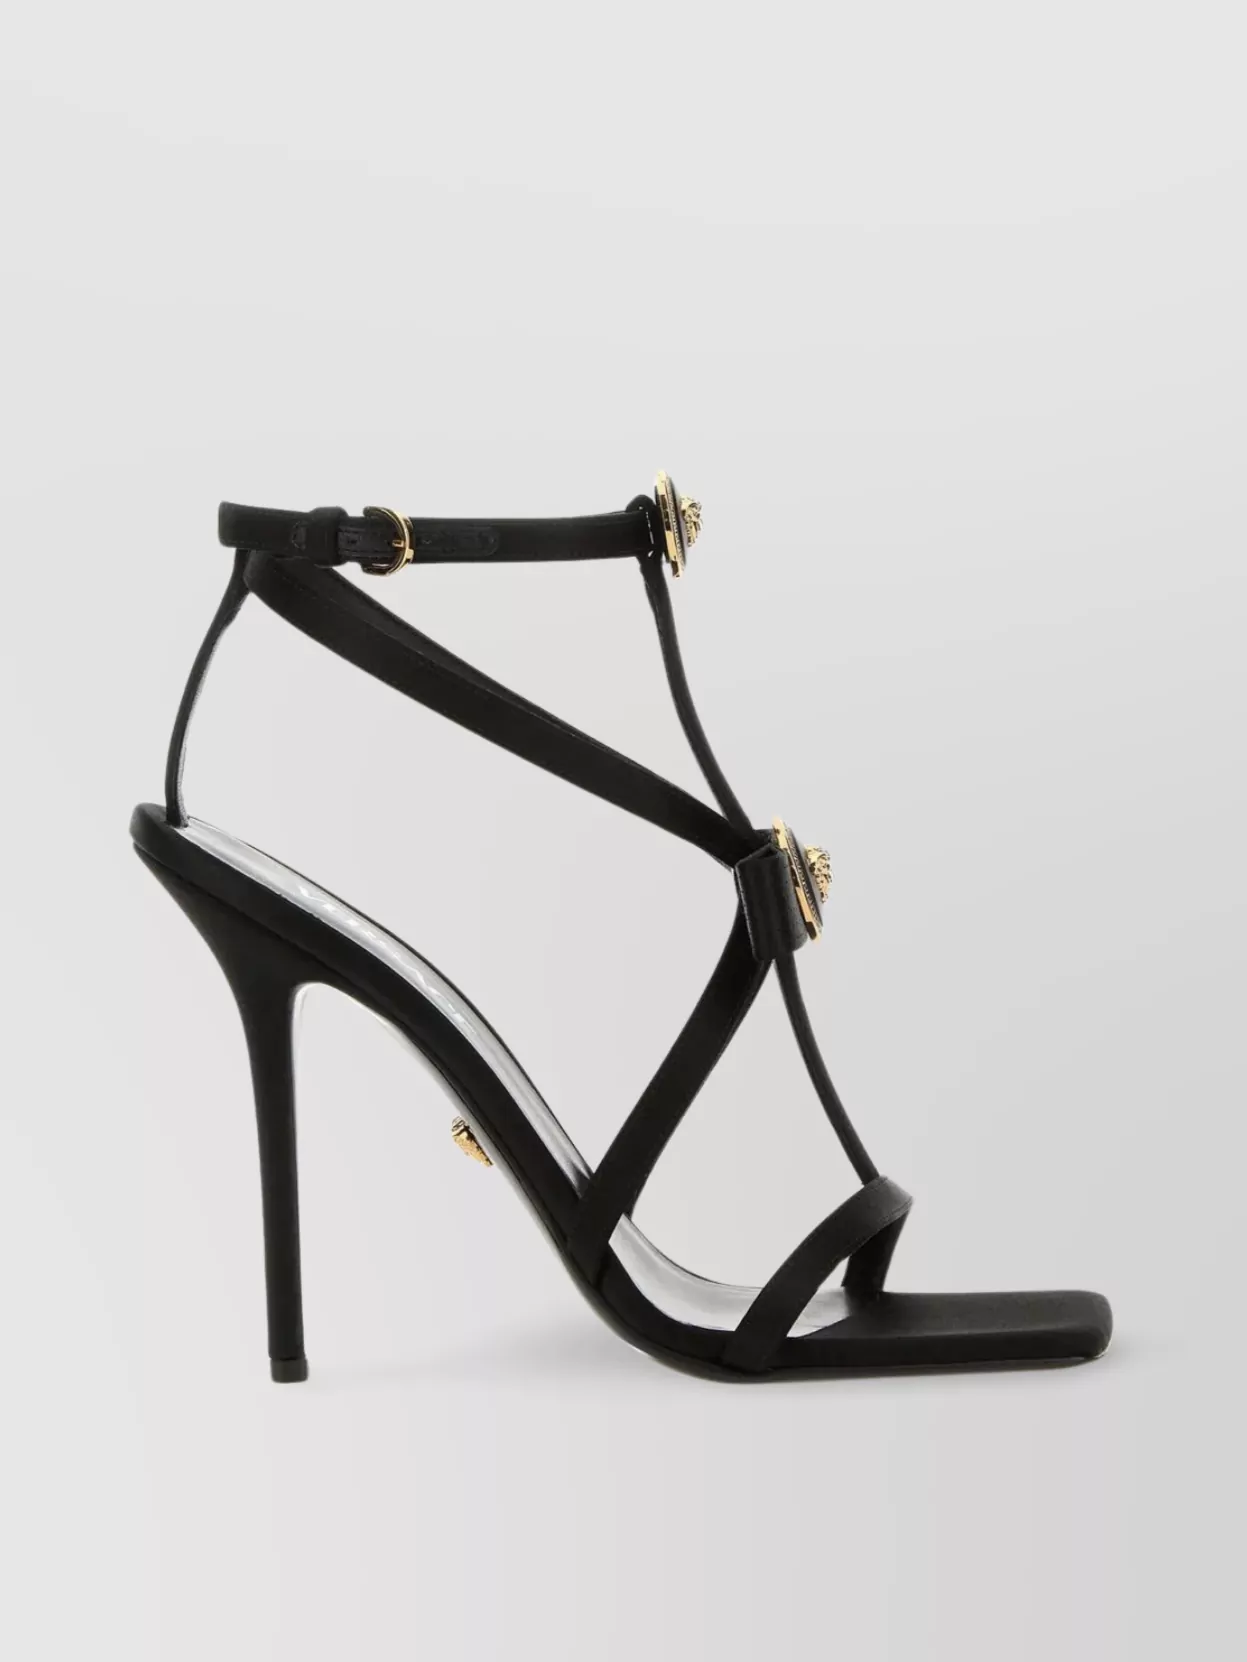 Shop Versace Satin Sandals With Square Toe And Strappy Design In Black